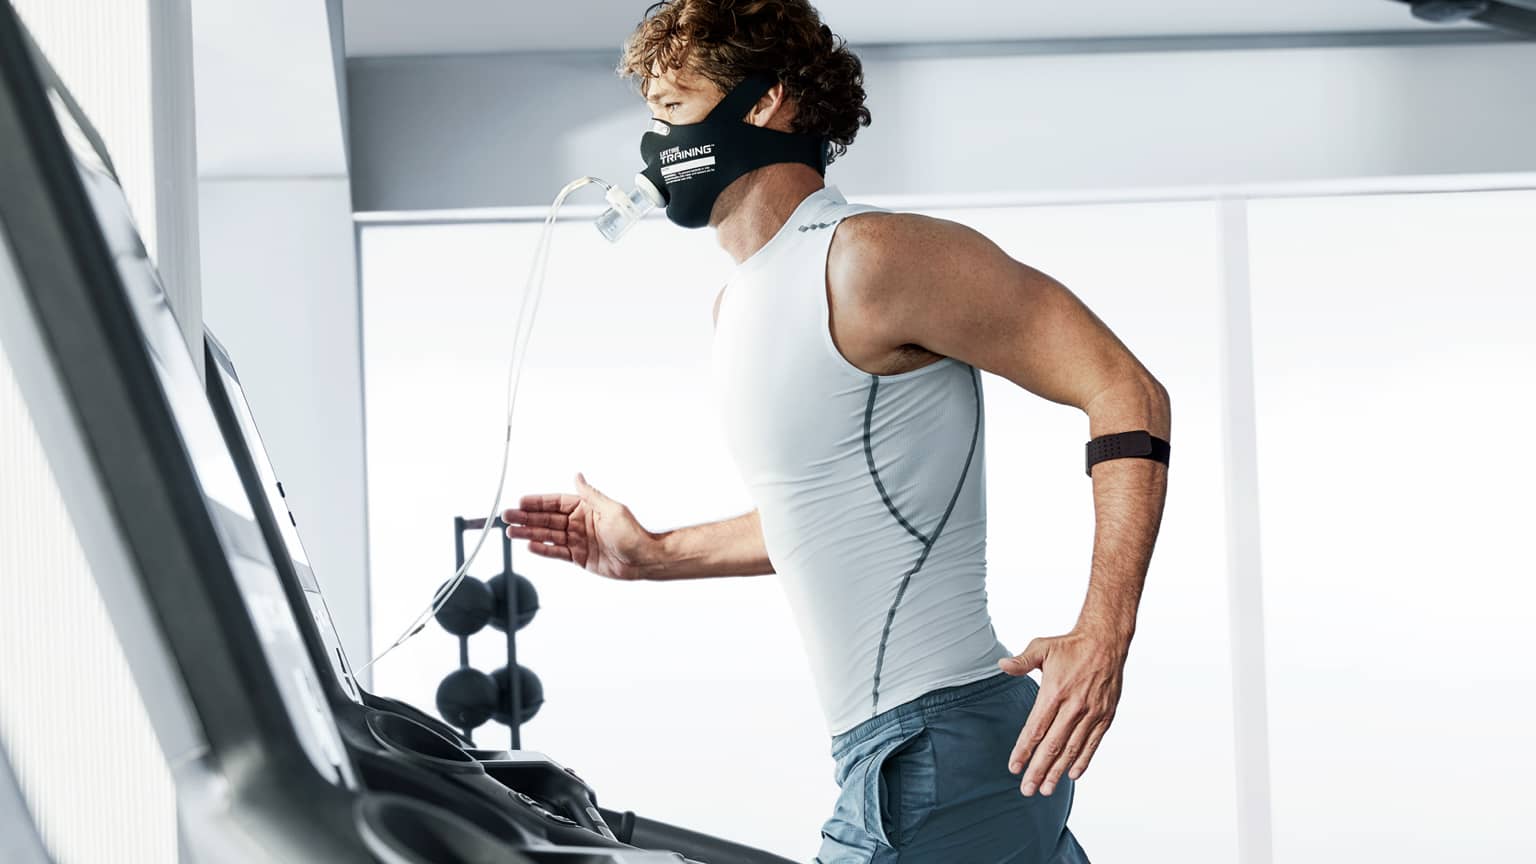 A Life Time member wearing a face mask and heart rate monitor runs on a treadmill